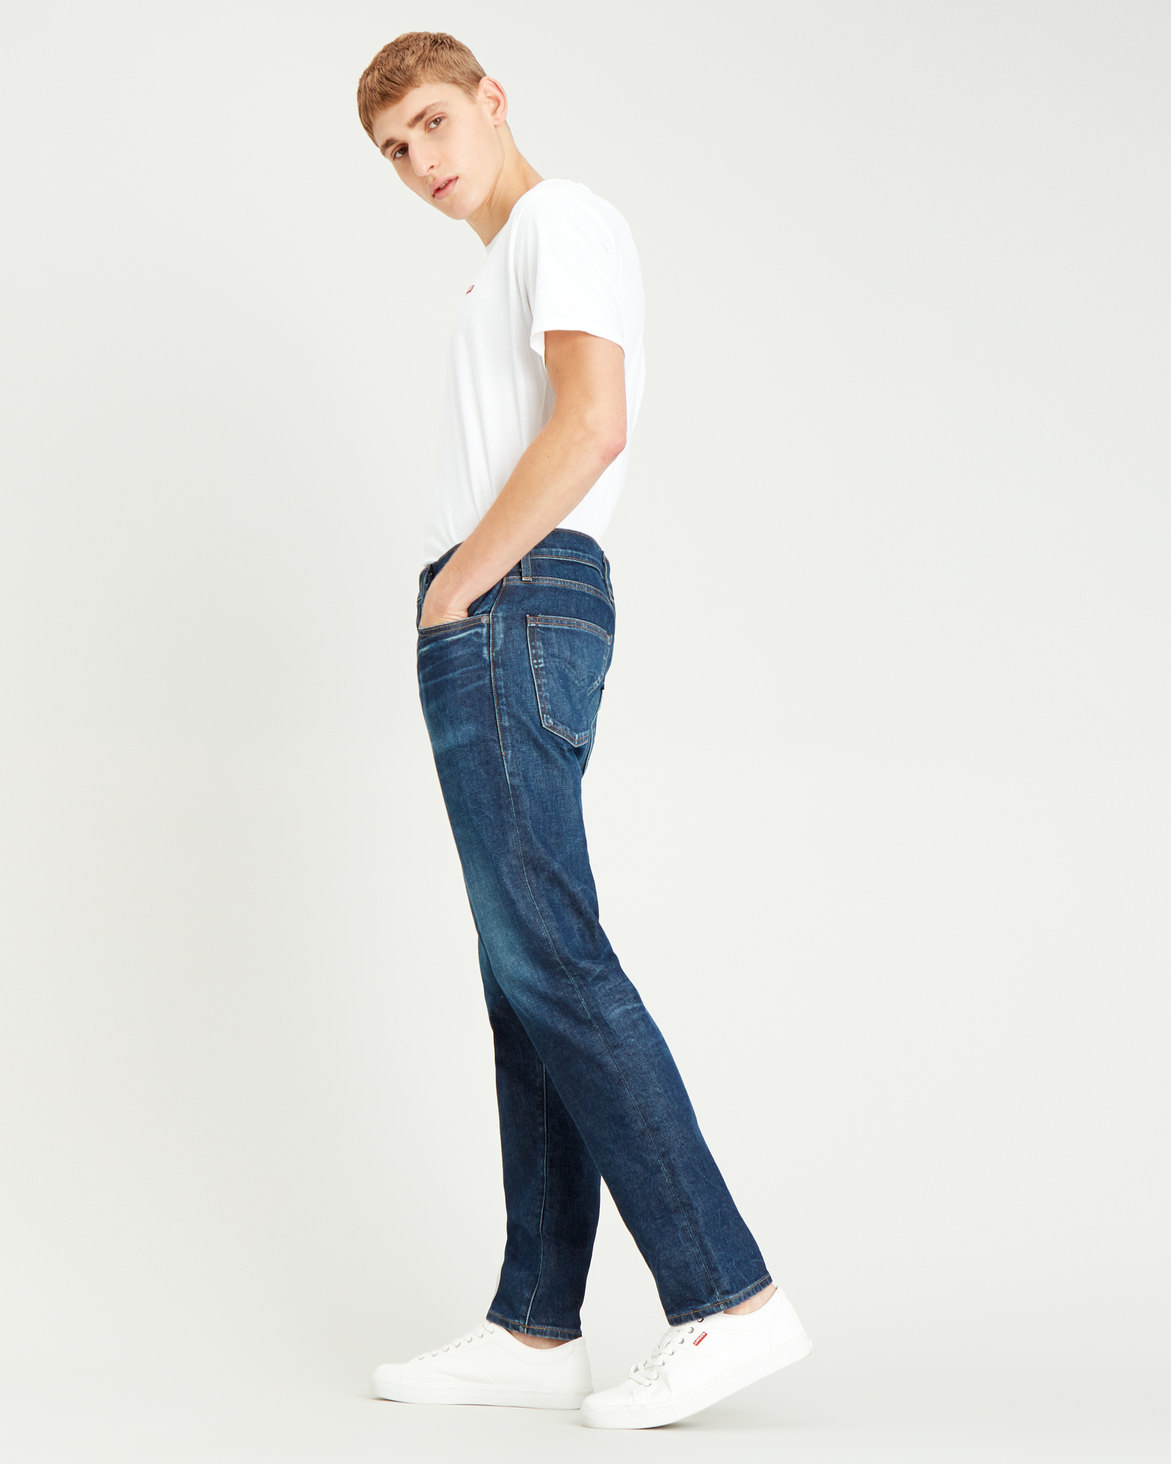 Levi’s® Made & Crafted® 502 Taper Fit Selvedge Jeans | Levi